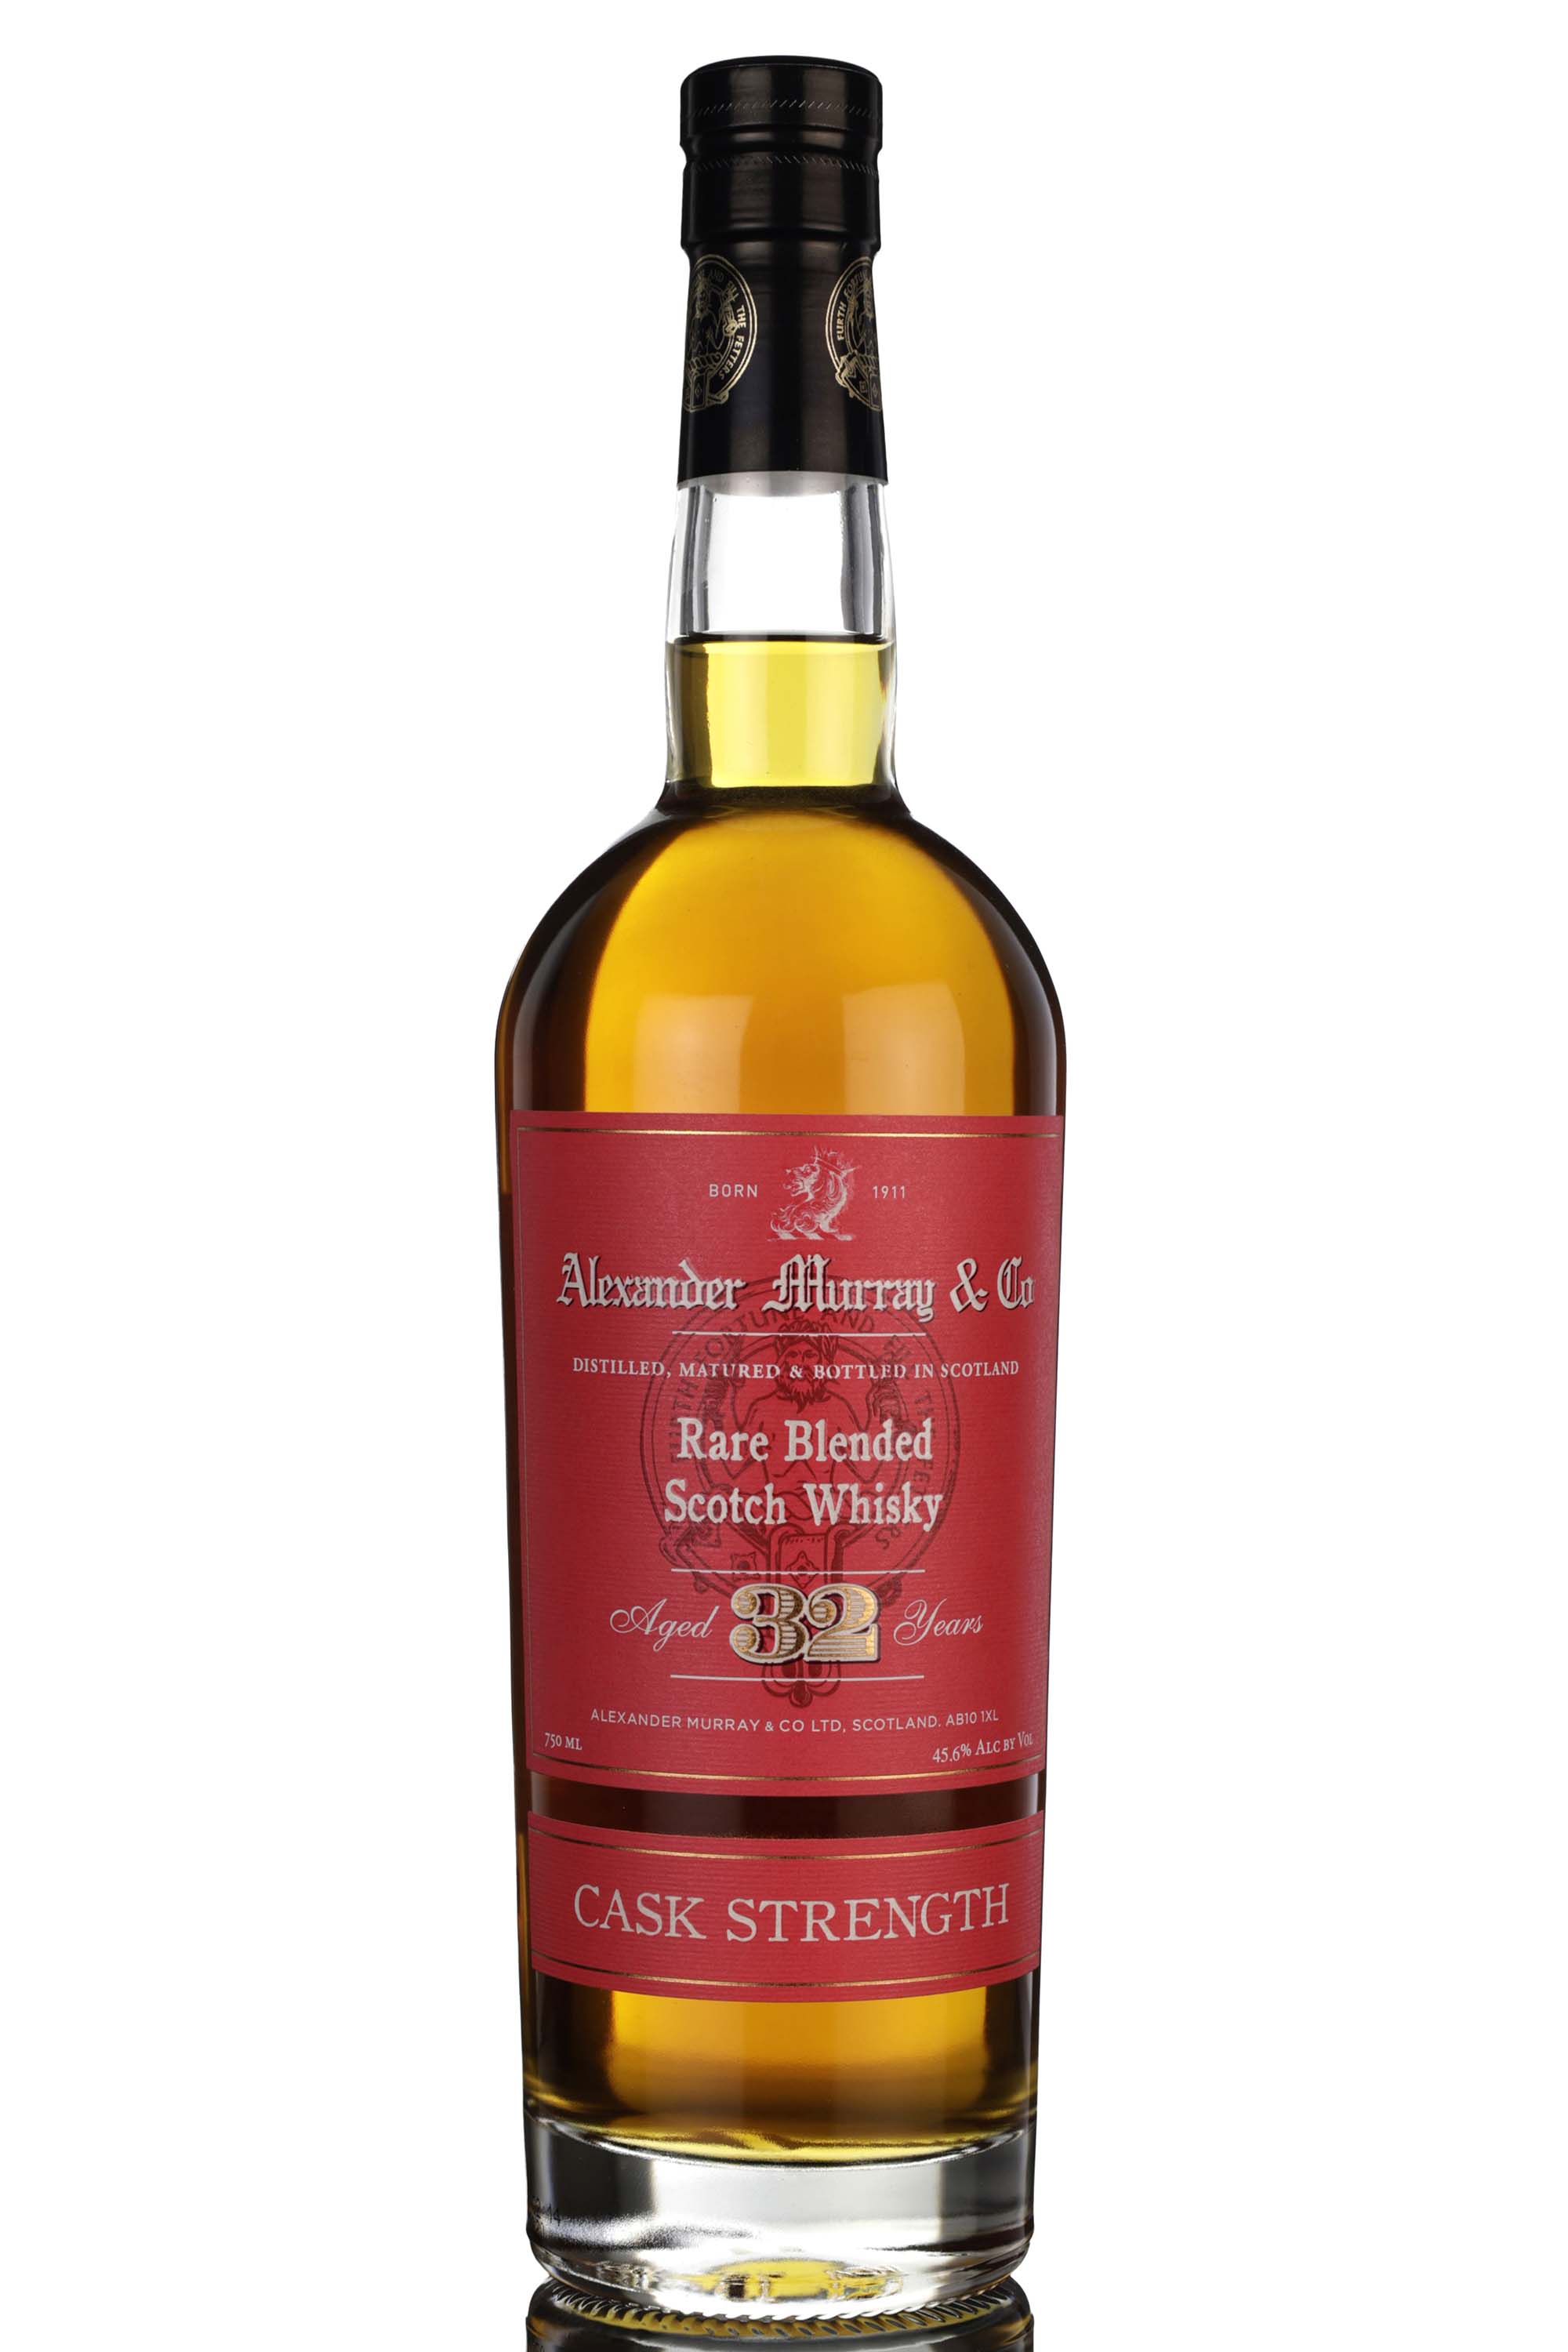 Rare Blended Scotch Whisky 32 Year Old - Alexander Murray - Cask Strength